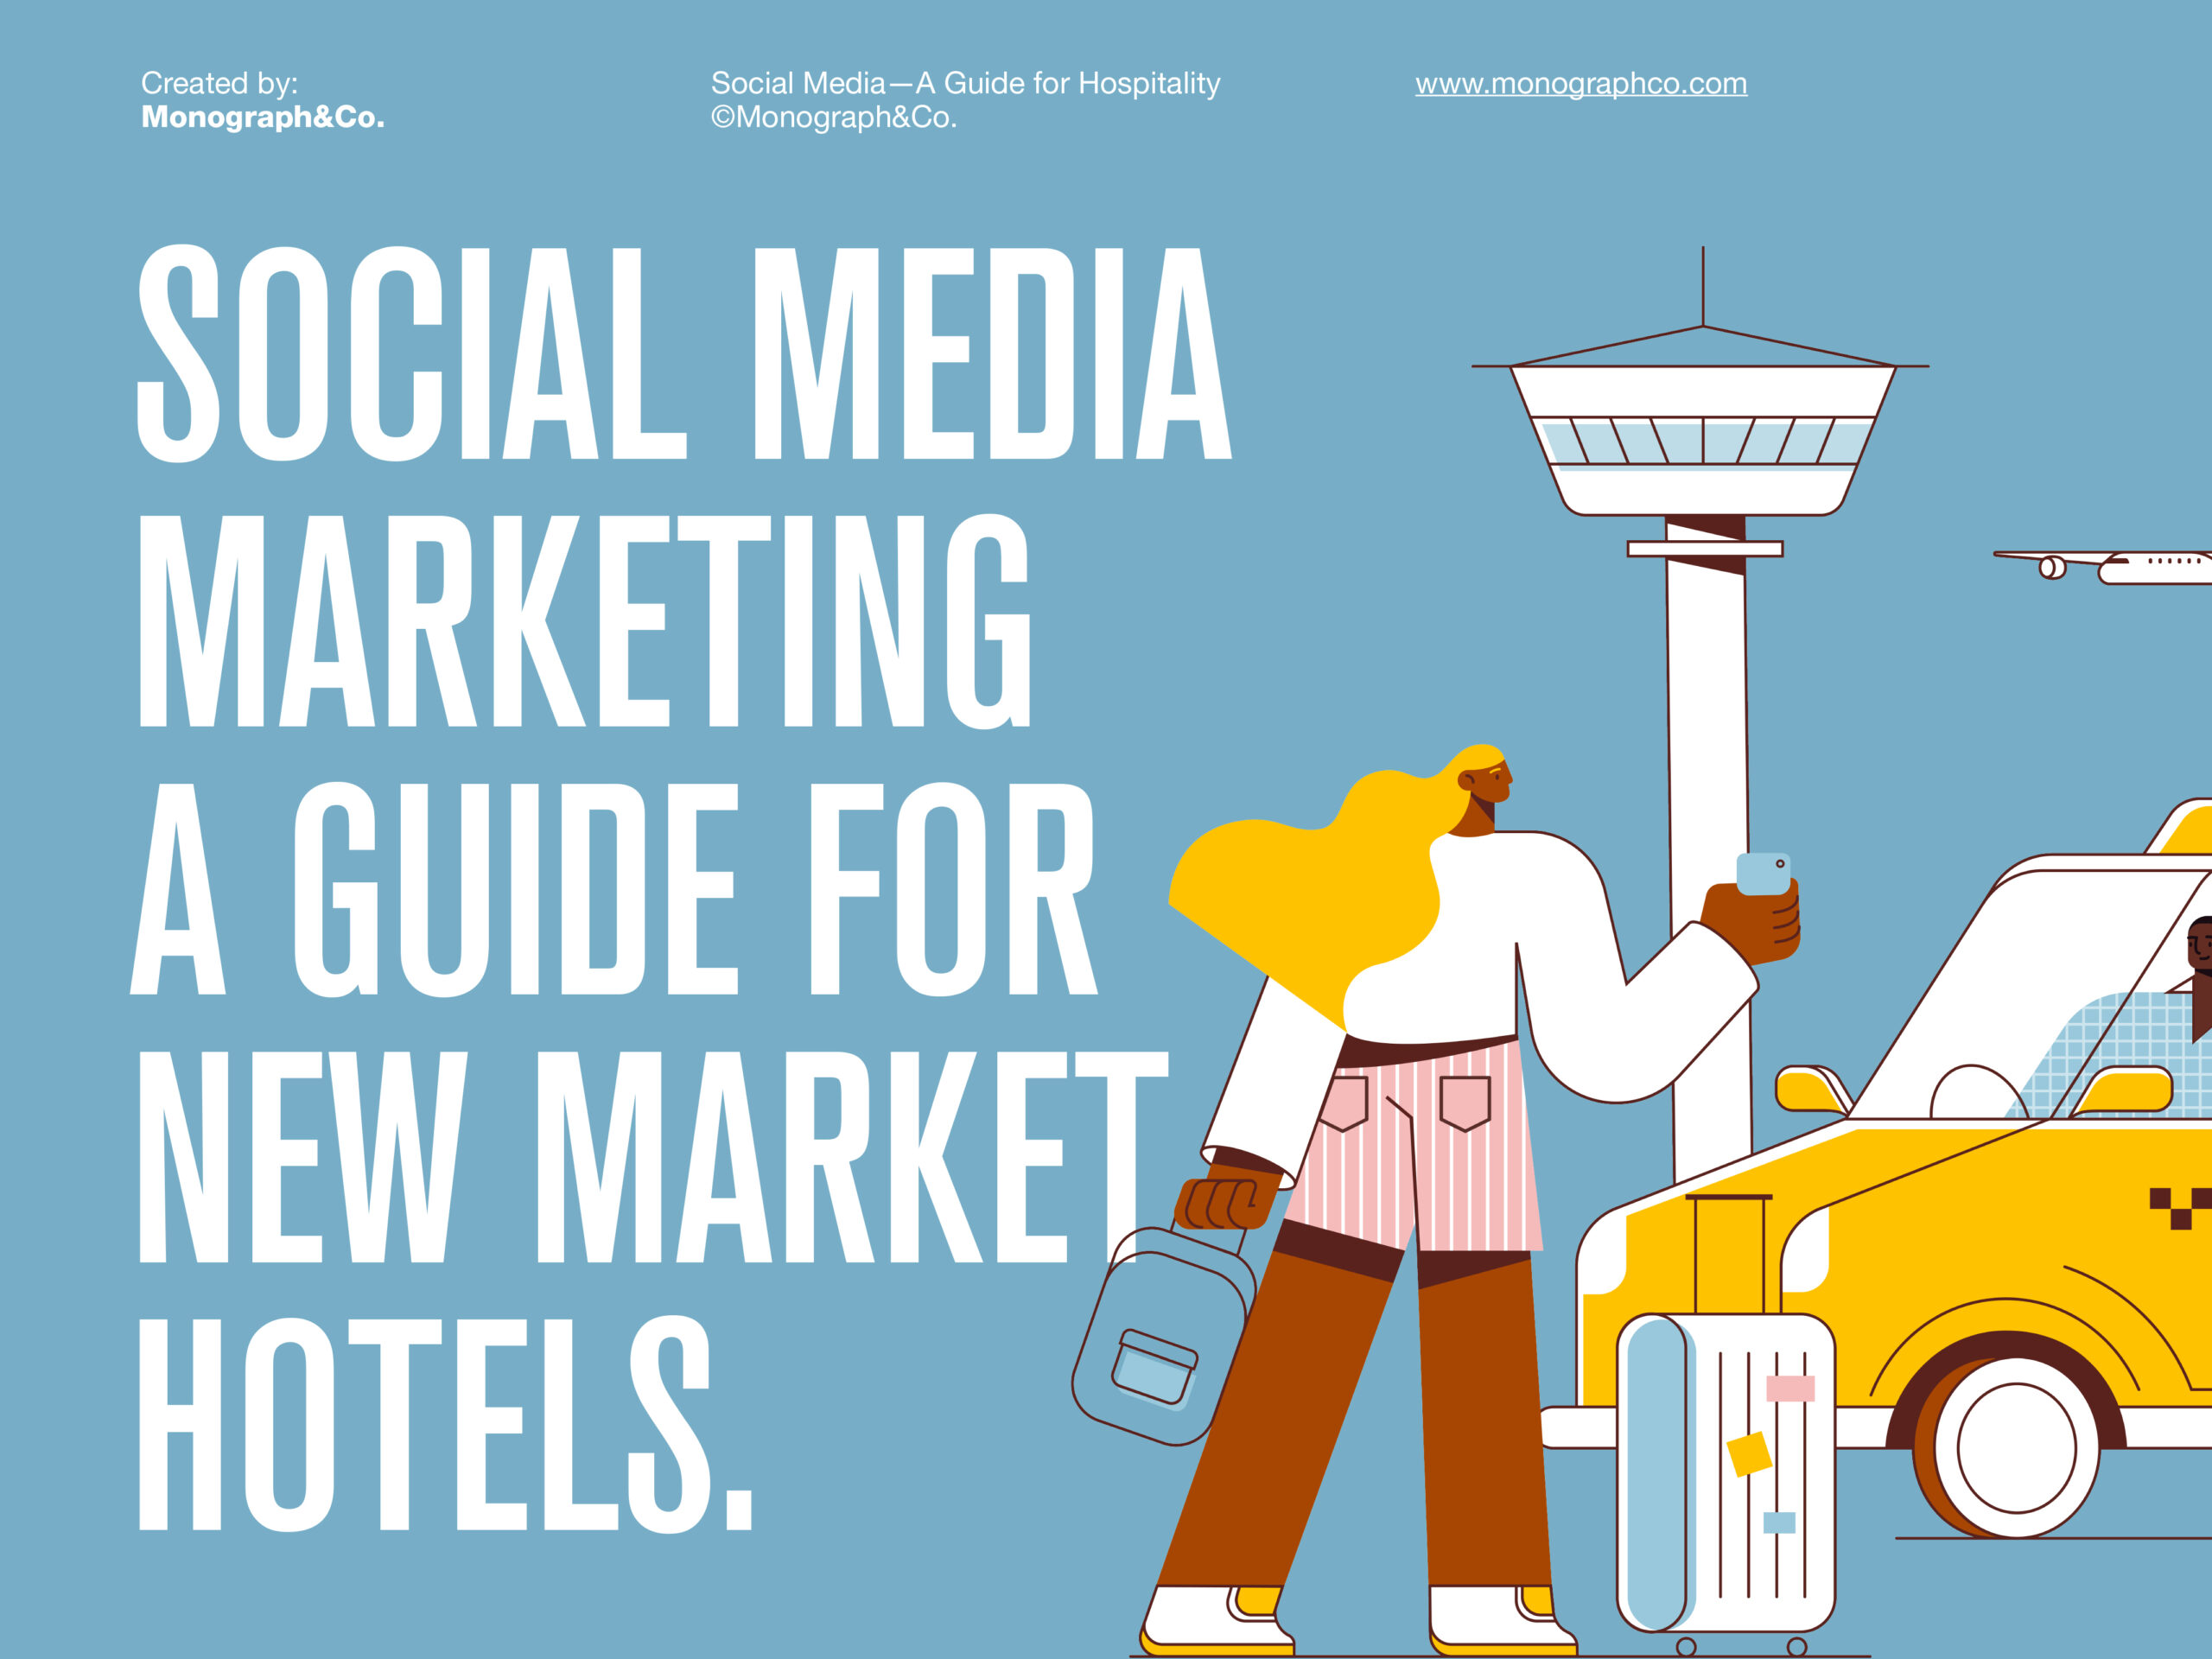 A Guide for New Market Hotels Social Media